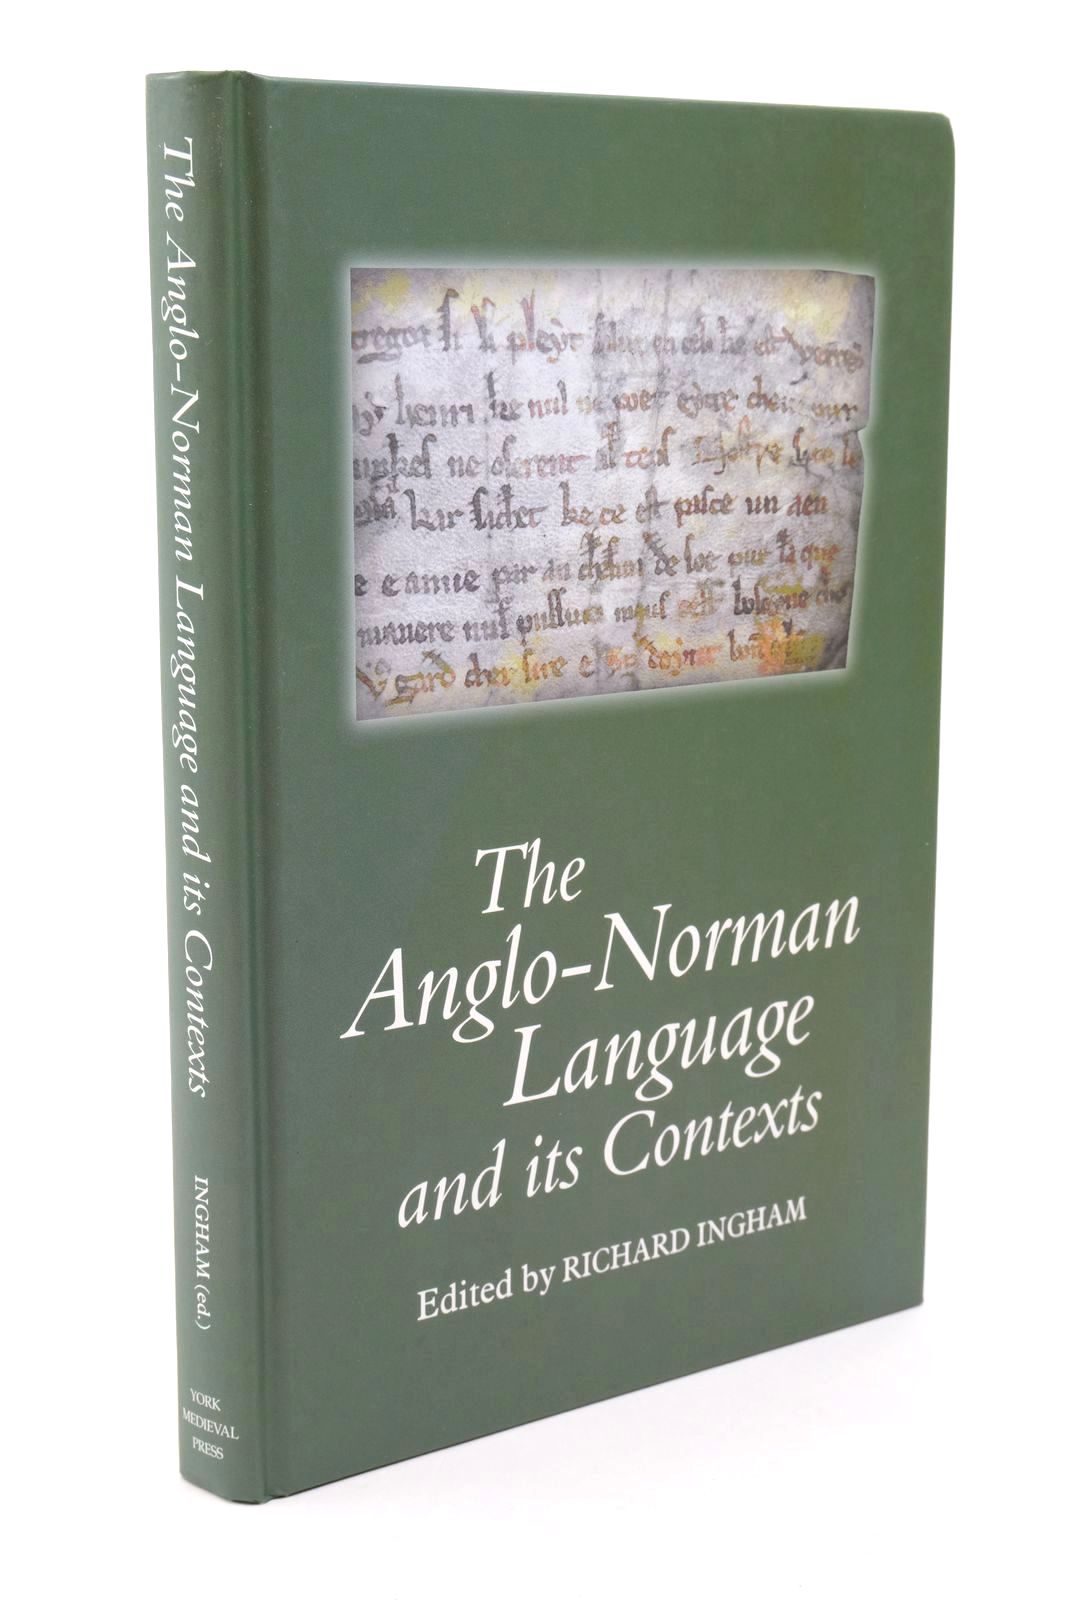 Photo of THE ANGLO-NORMAN LANGUAGE AND ITS CONTEXTS written by Ingham, Richard published by The Boydell Press (STOCK CODE: 1322638)  for sale by Stella & Rose's Books